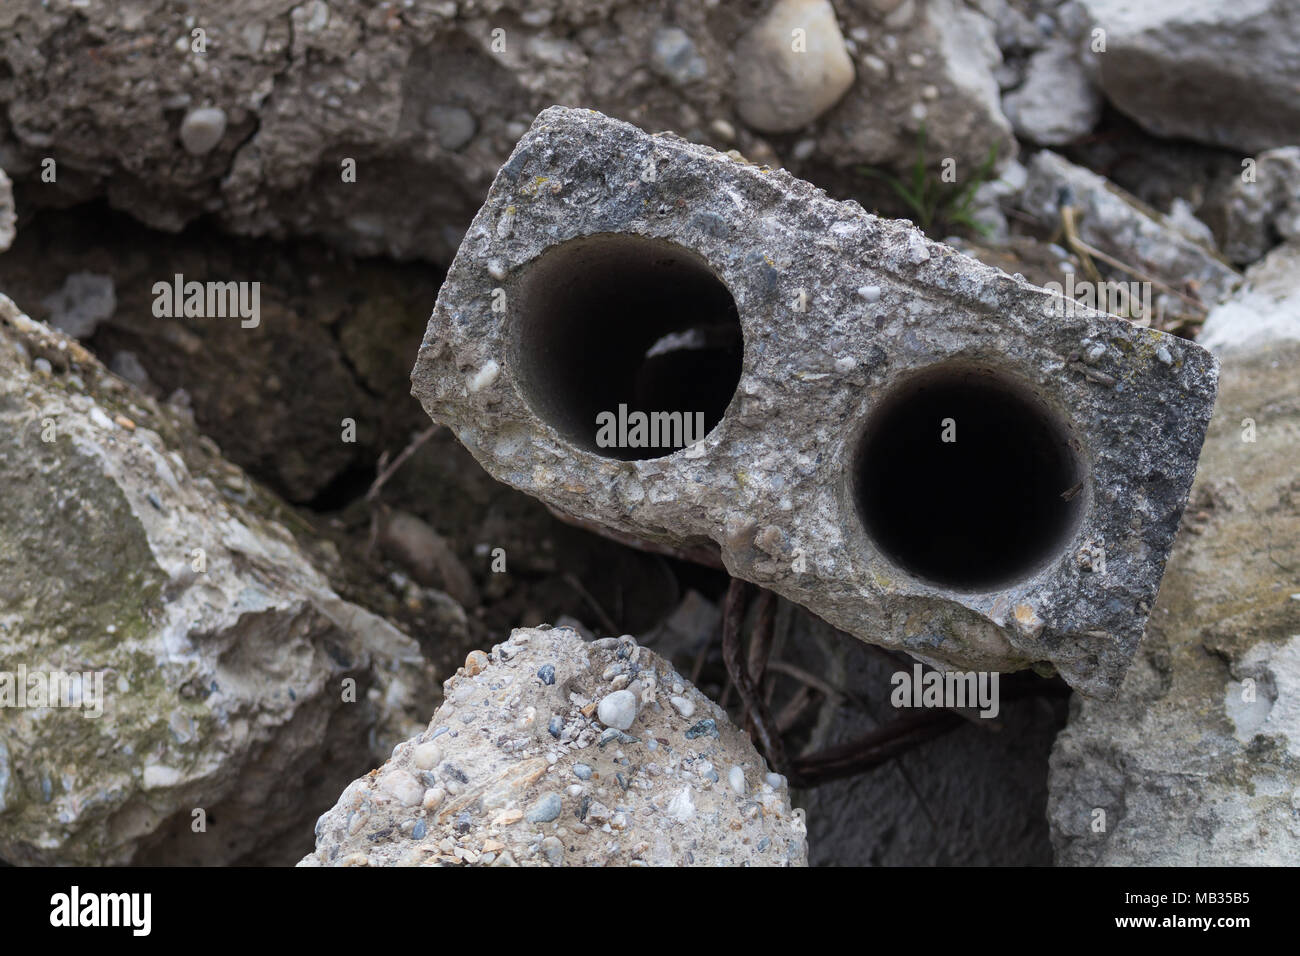 Detail of a broken concrete at a junkyard, which looks like eyes of an animal. Stock Photo